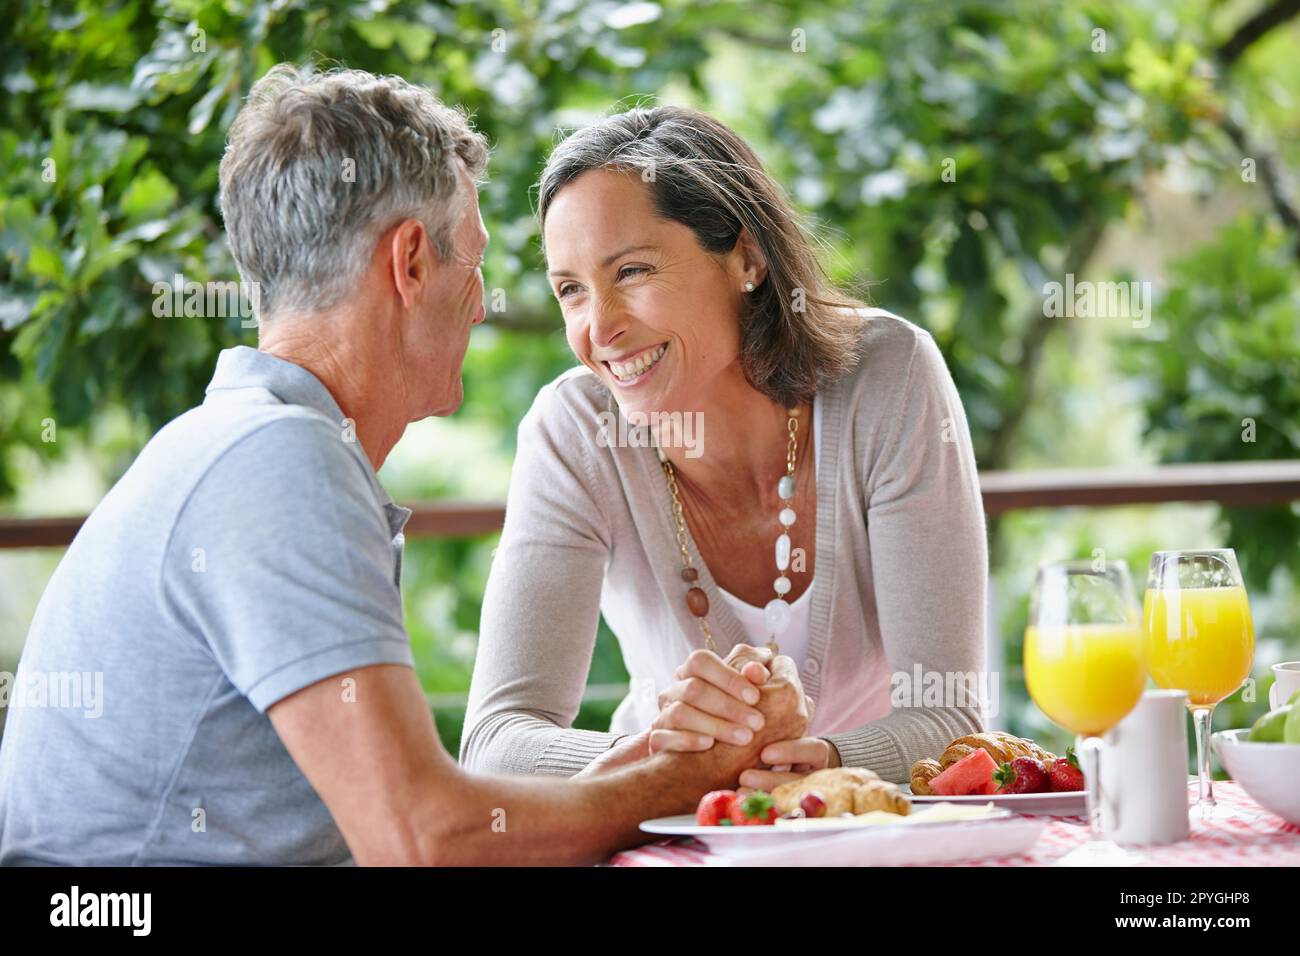 They bring each other joy. a mature couple bonding while having breakfast together outdoors. Stock Photo